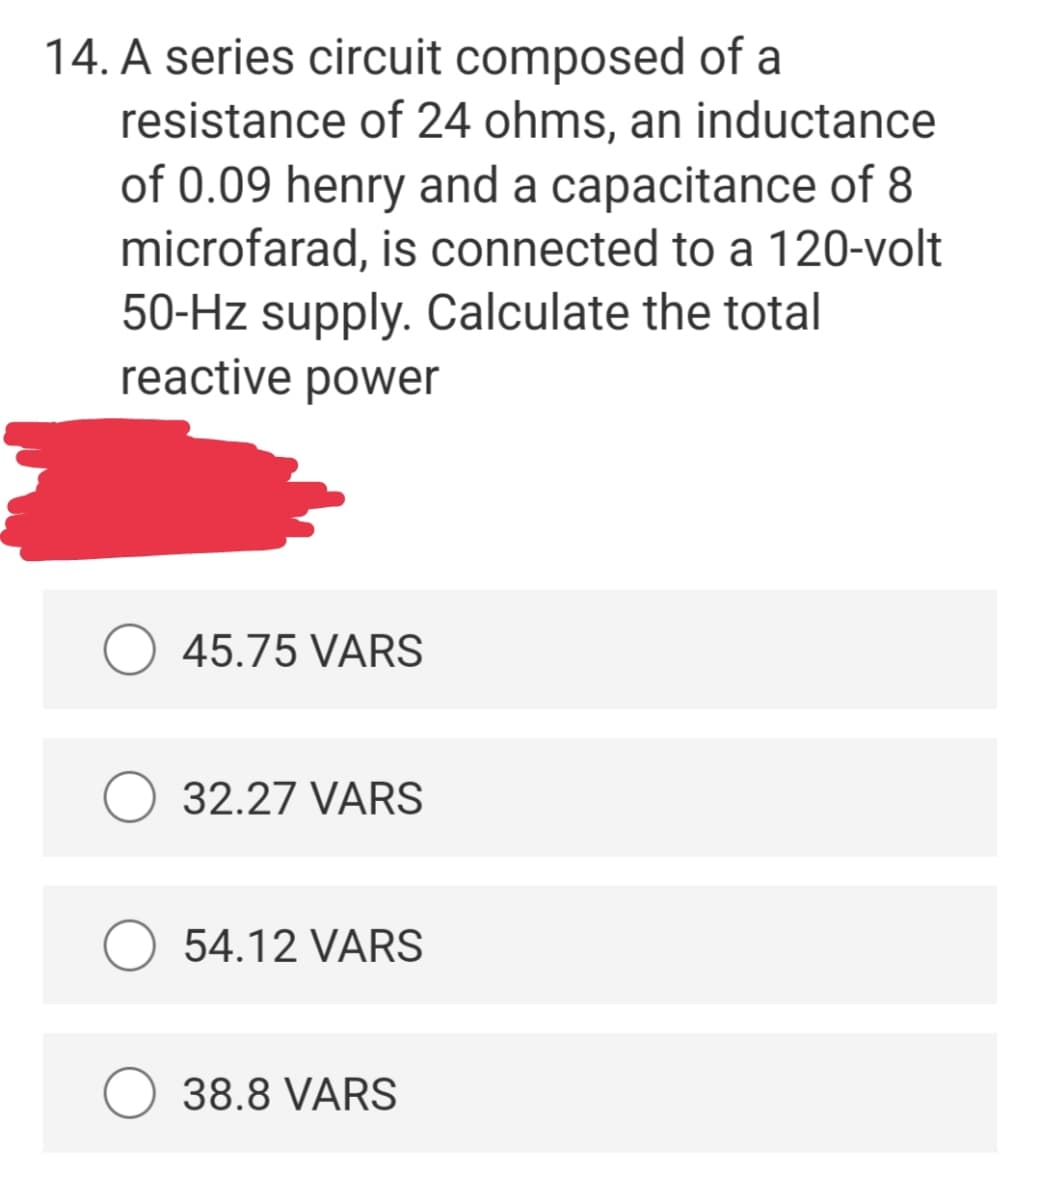 14. A series circuit composed of a
resistance of 24 ohms, an inductance
of 0.09 henry and a capacitance of 8
microfarad, is connected to a 120-volt
50-Hz supply. Calculate the total
reactive power
45.75 VARS
32.27 VARS
54.12 VARS
38.8 VARS
